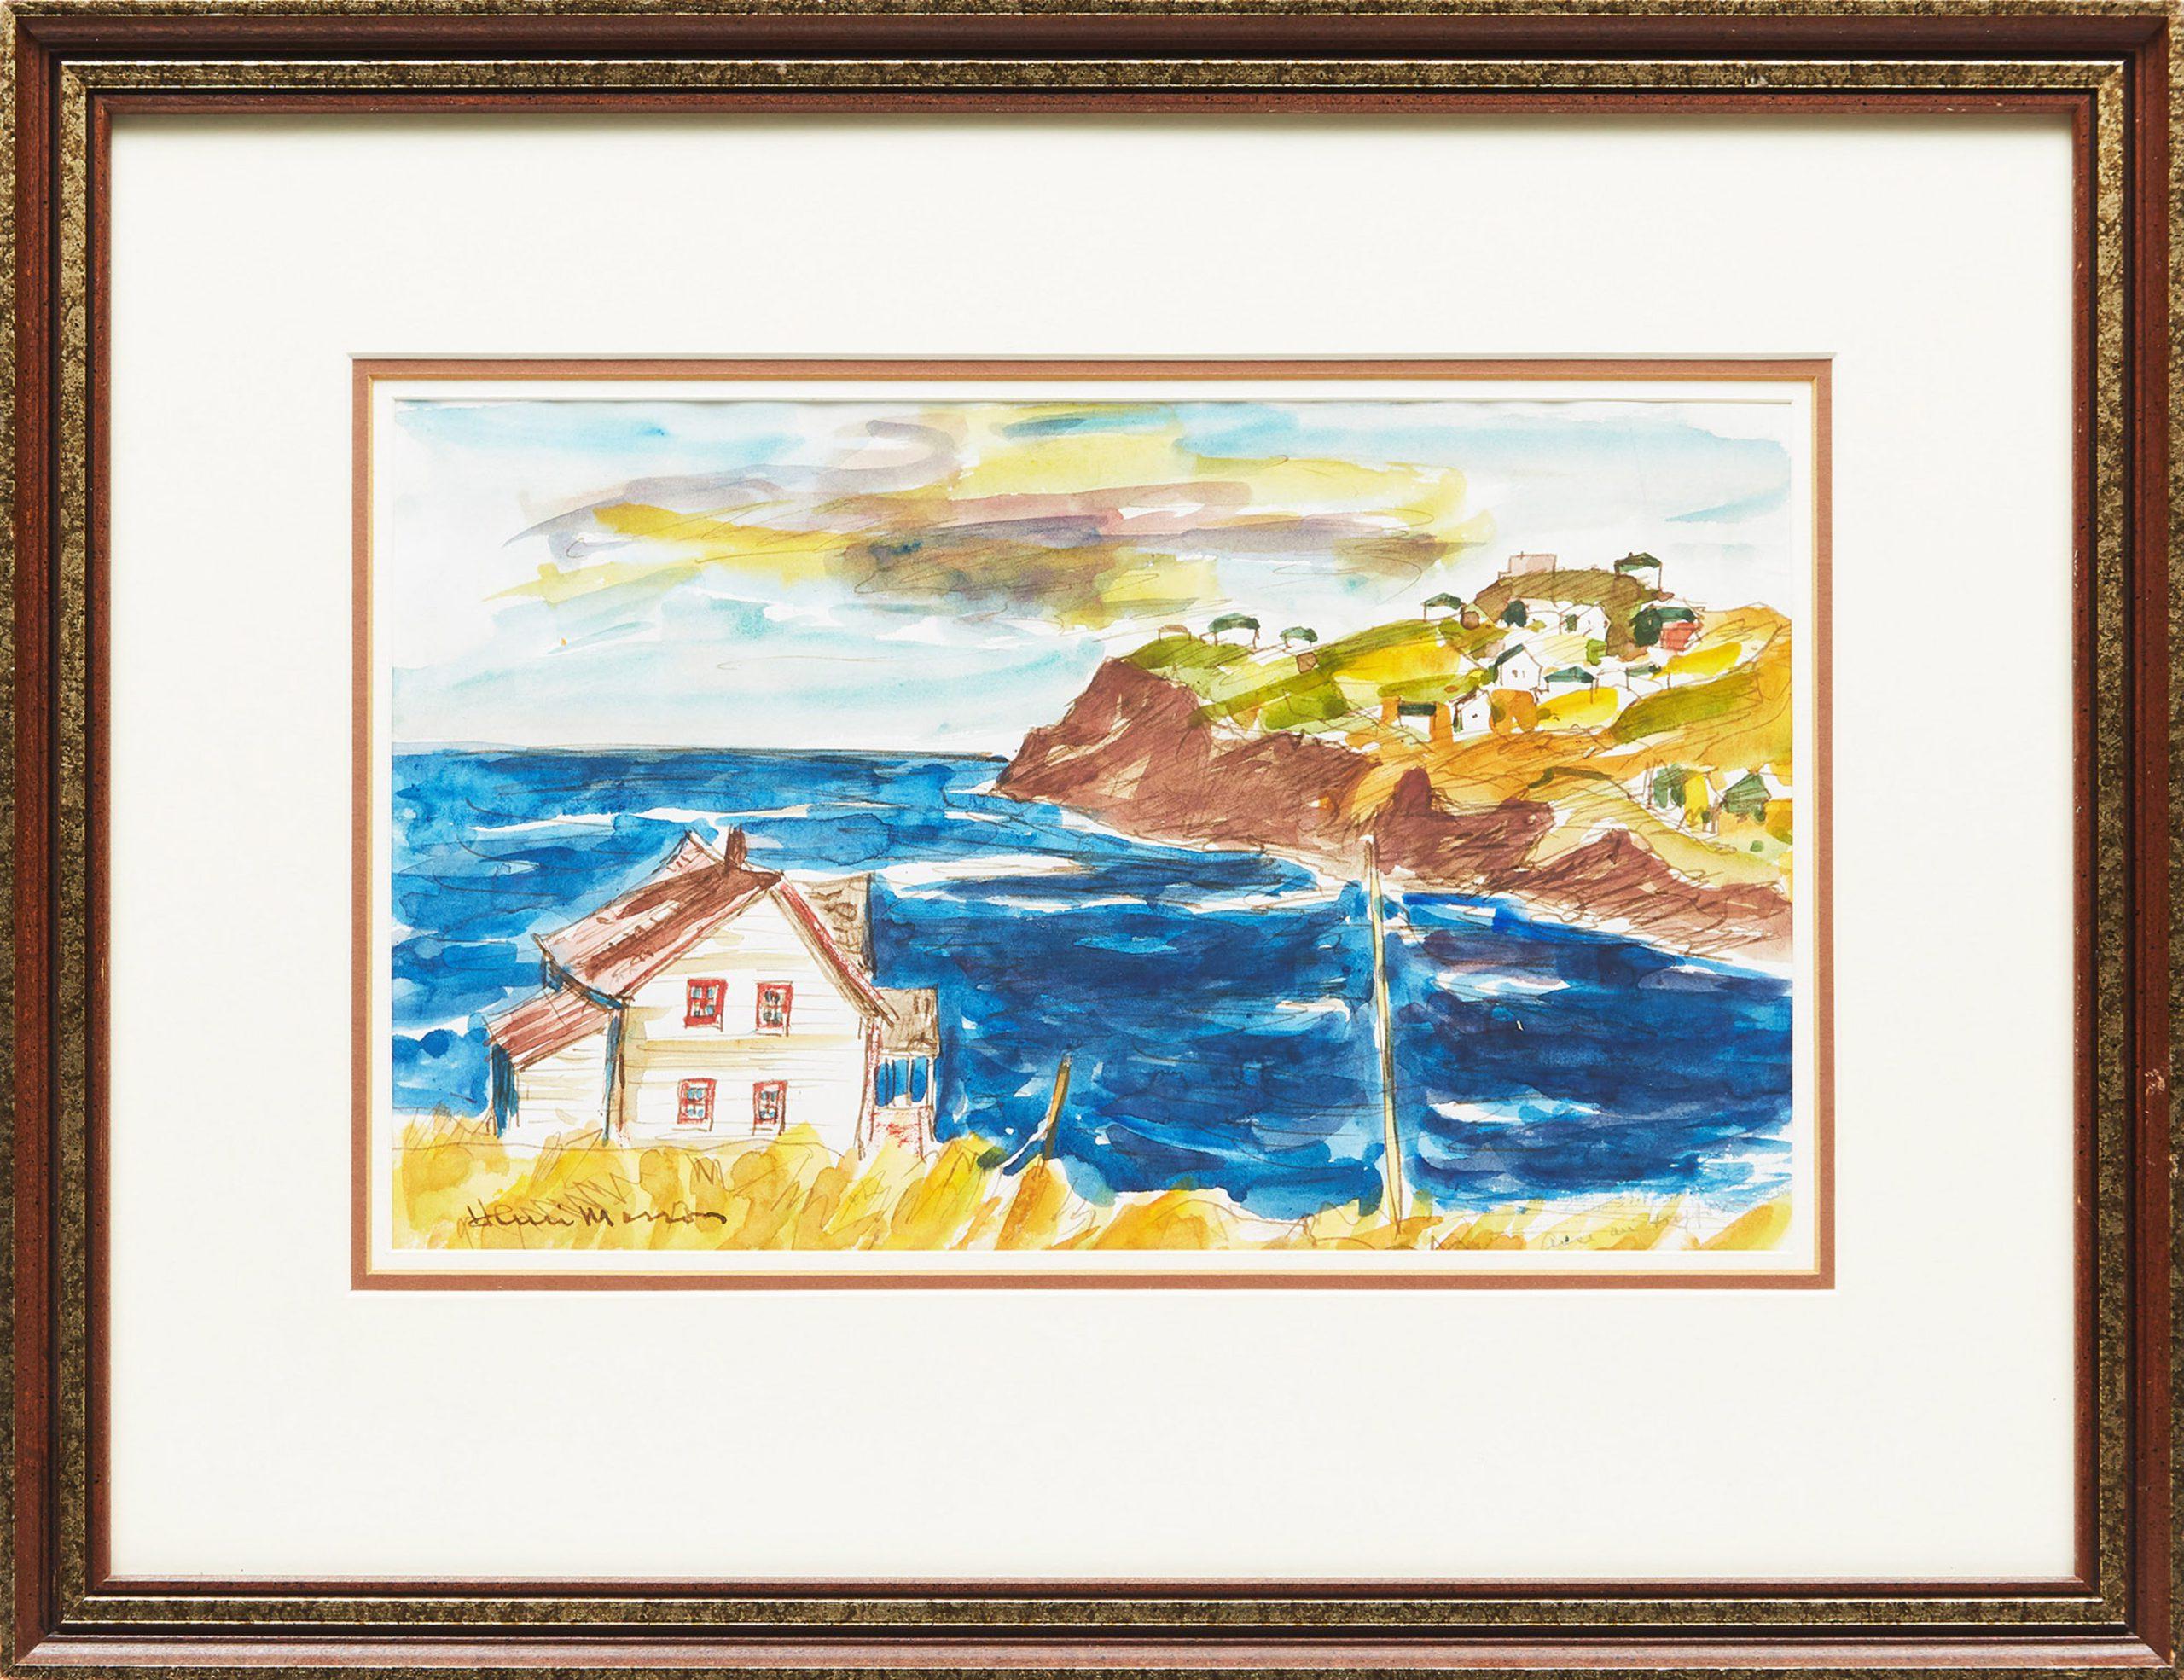 Henri Masson, 1907-1996, Canadian
ANSE AU GRIFFON, 1978
Watercolour
8.25 x 13.25 in ( sight )
21 x 33.7 cm
signed lower left; titled lower right; signed, titled and dated
framed